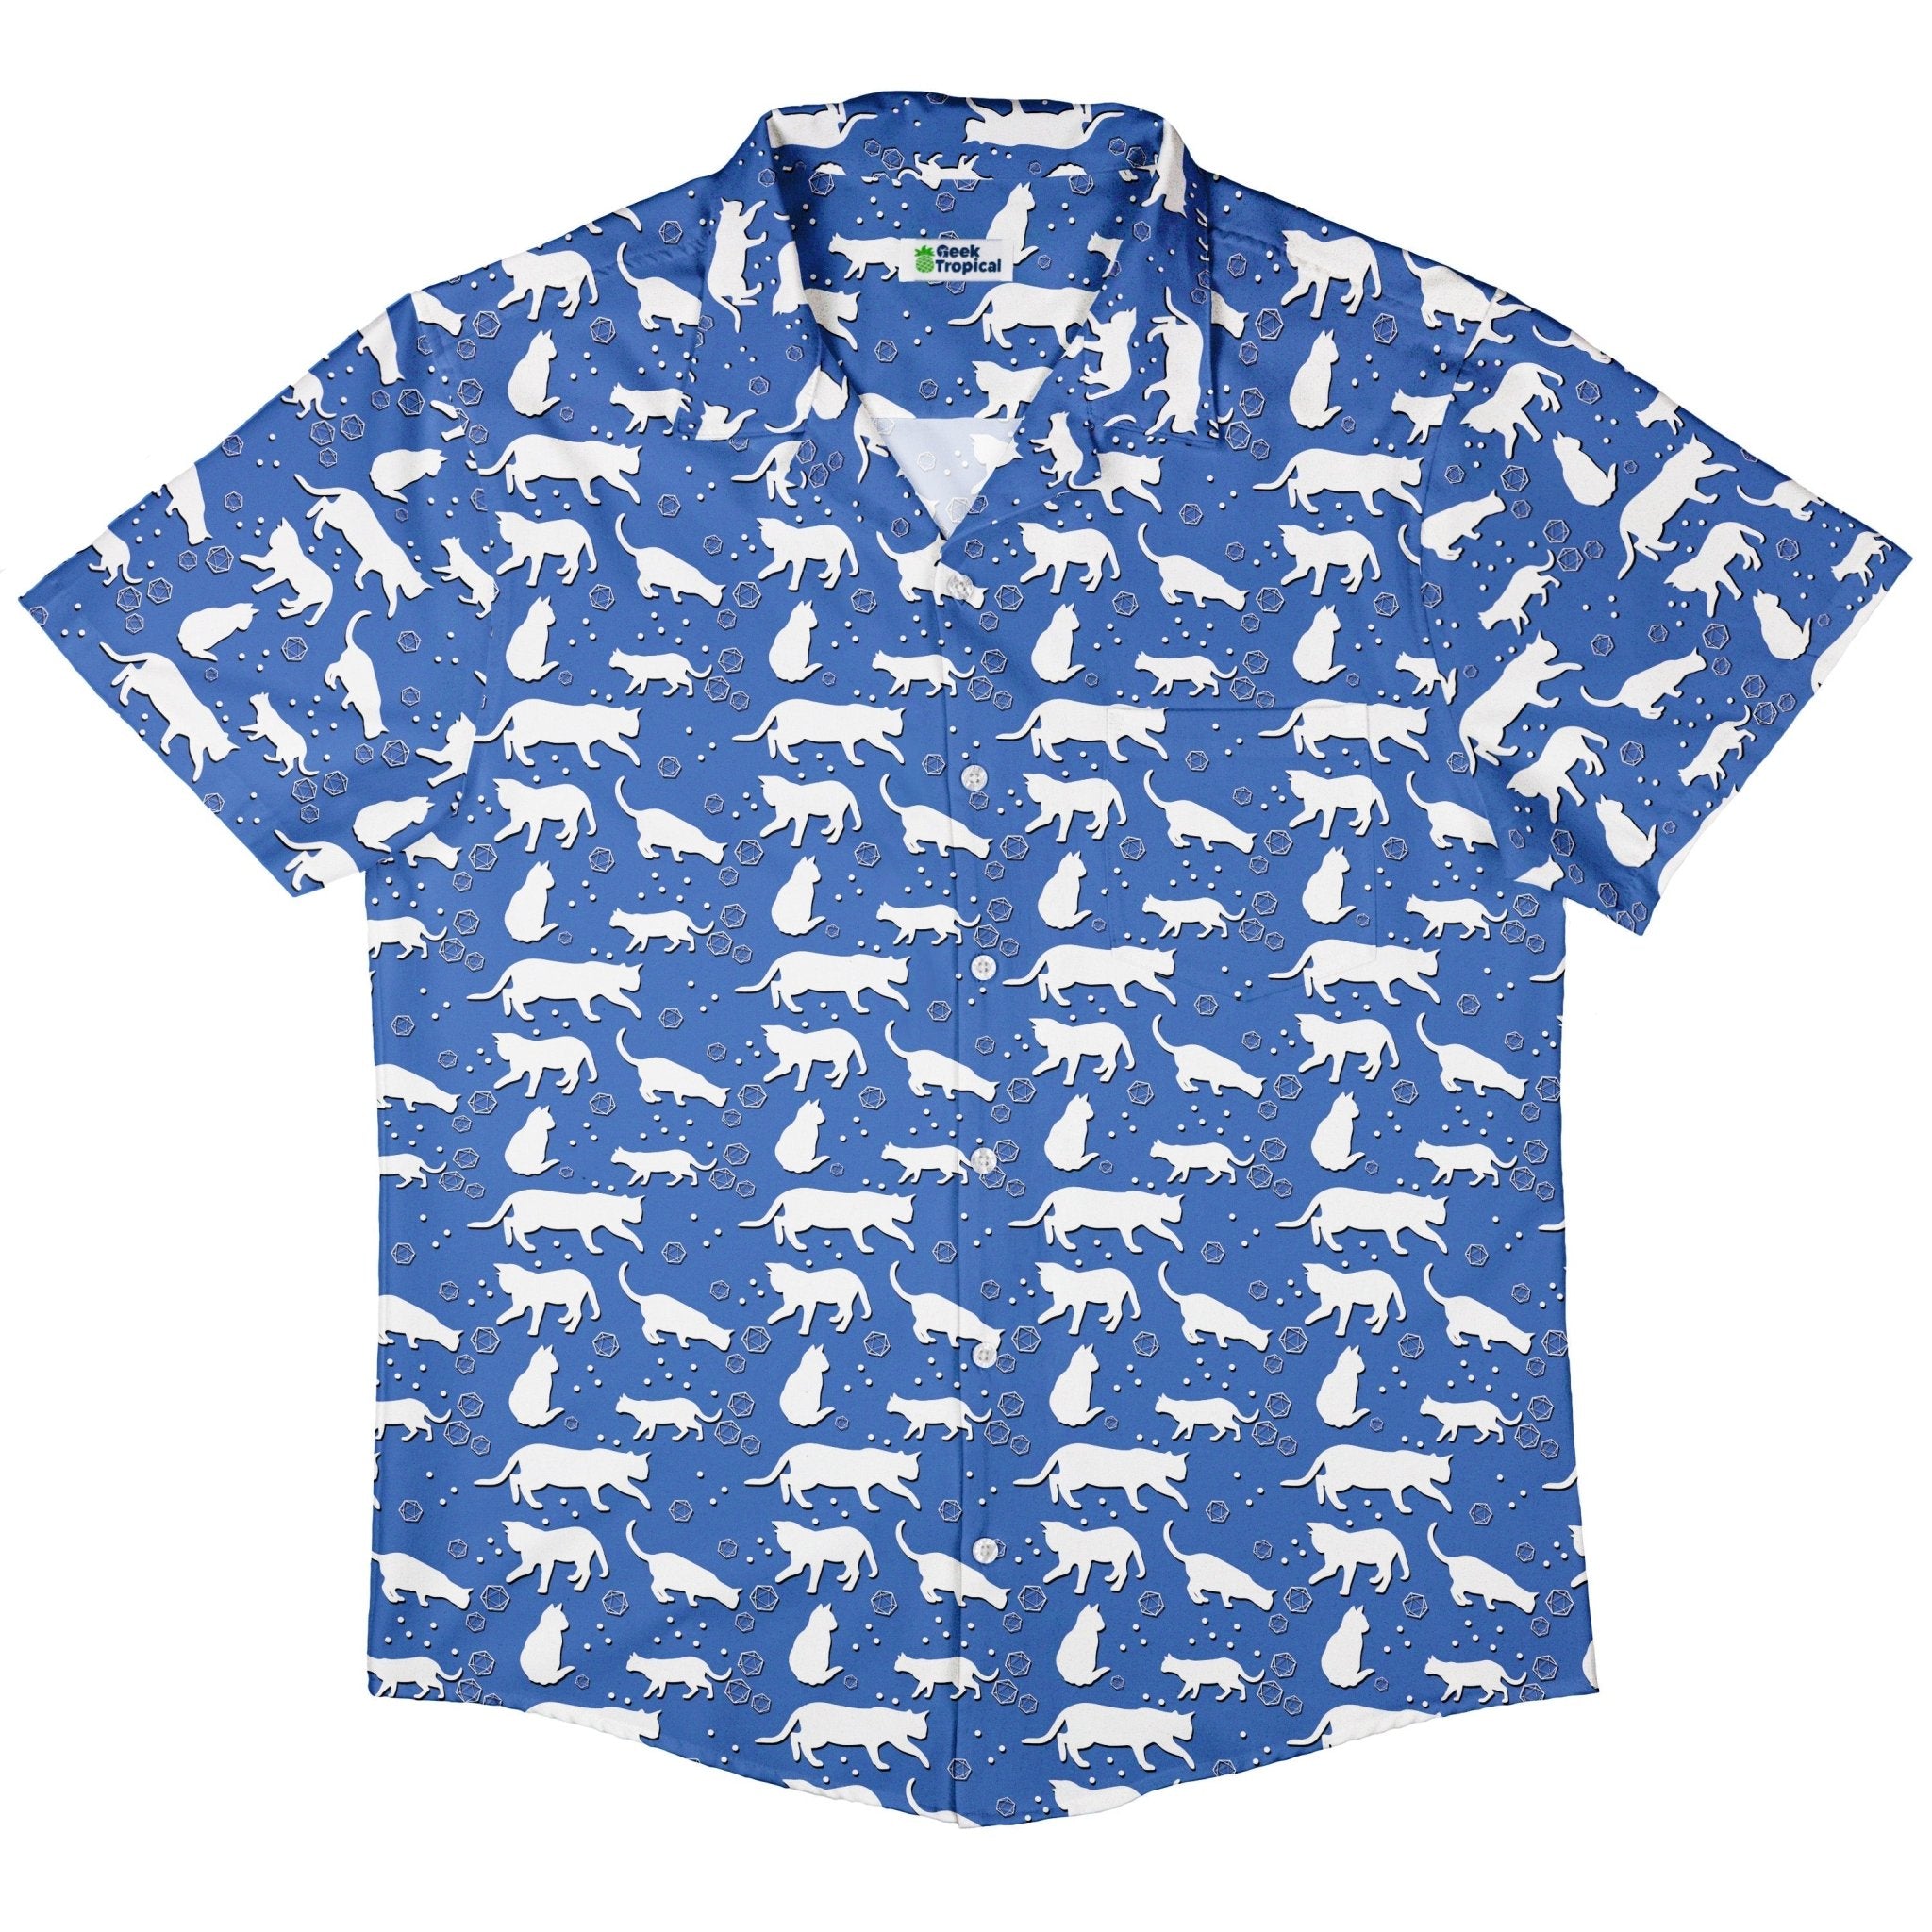 Dnd Dice Cats Button Up Shirt - adult sizing - Animal Patterns - Design by Heather Davenport